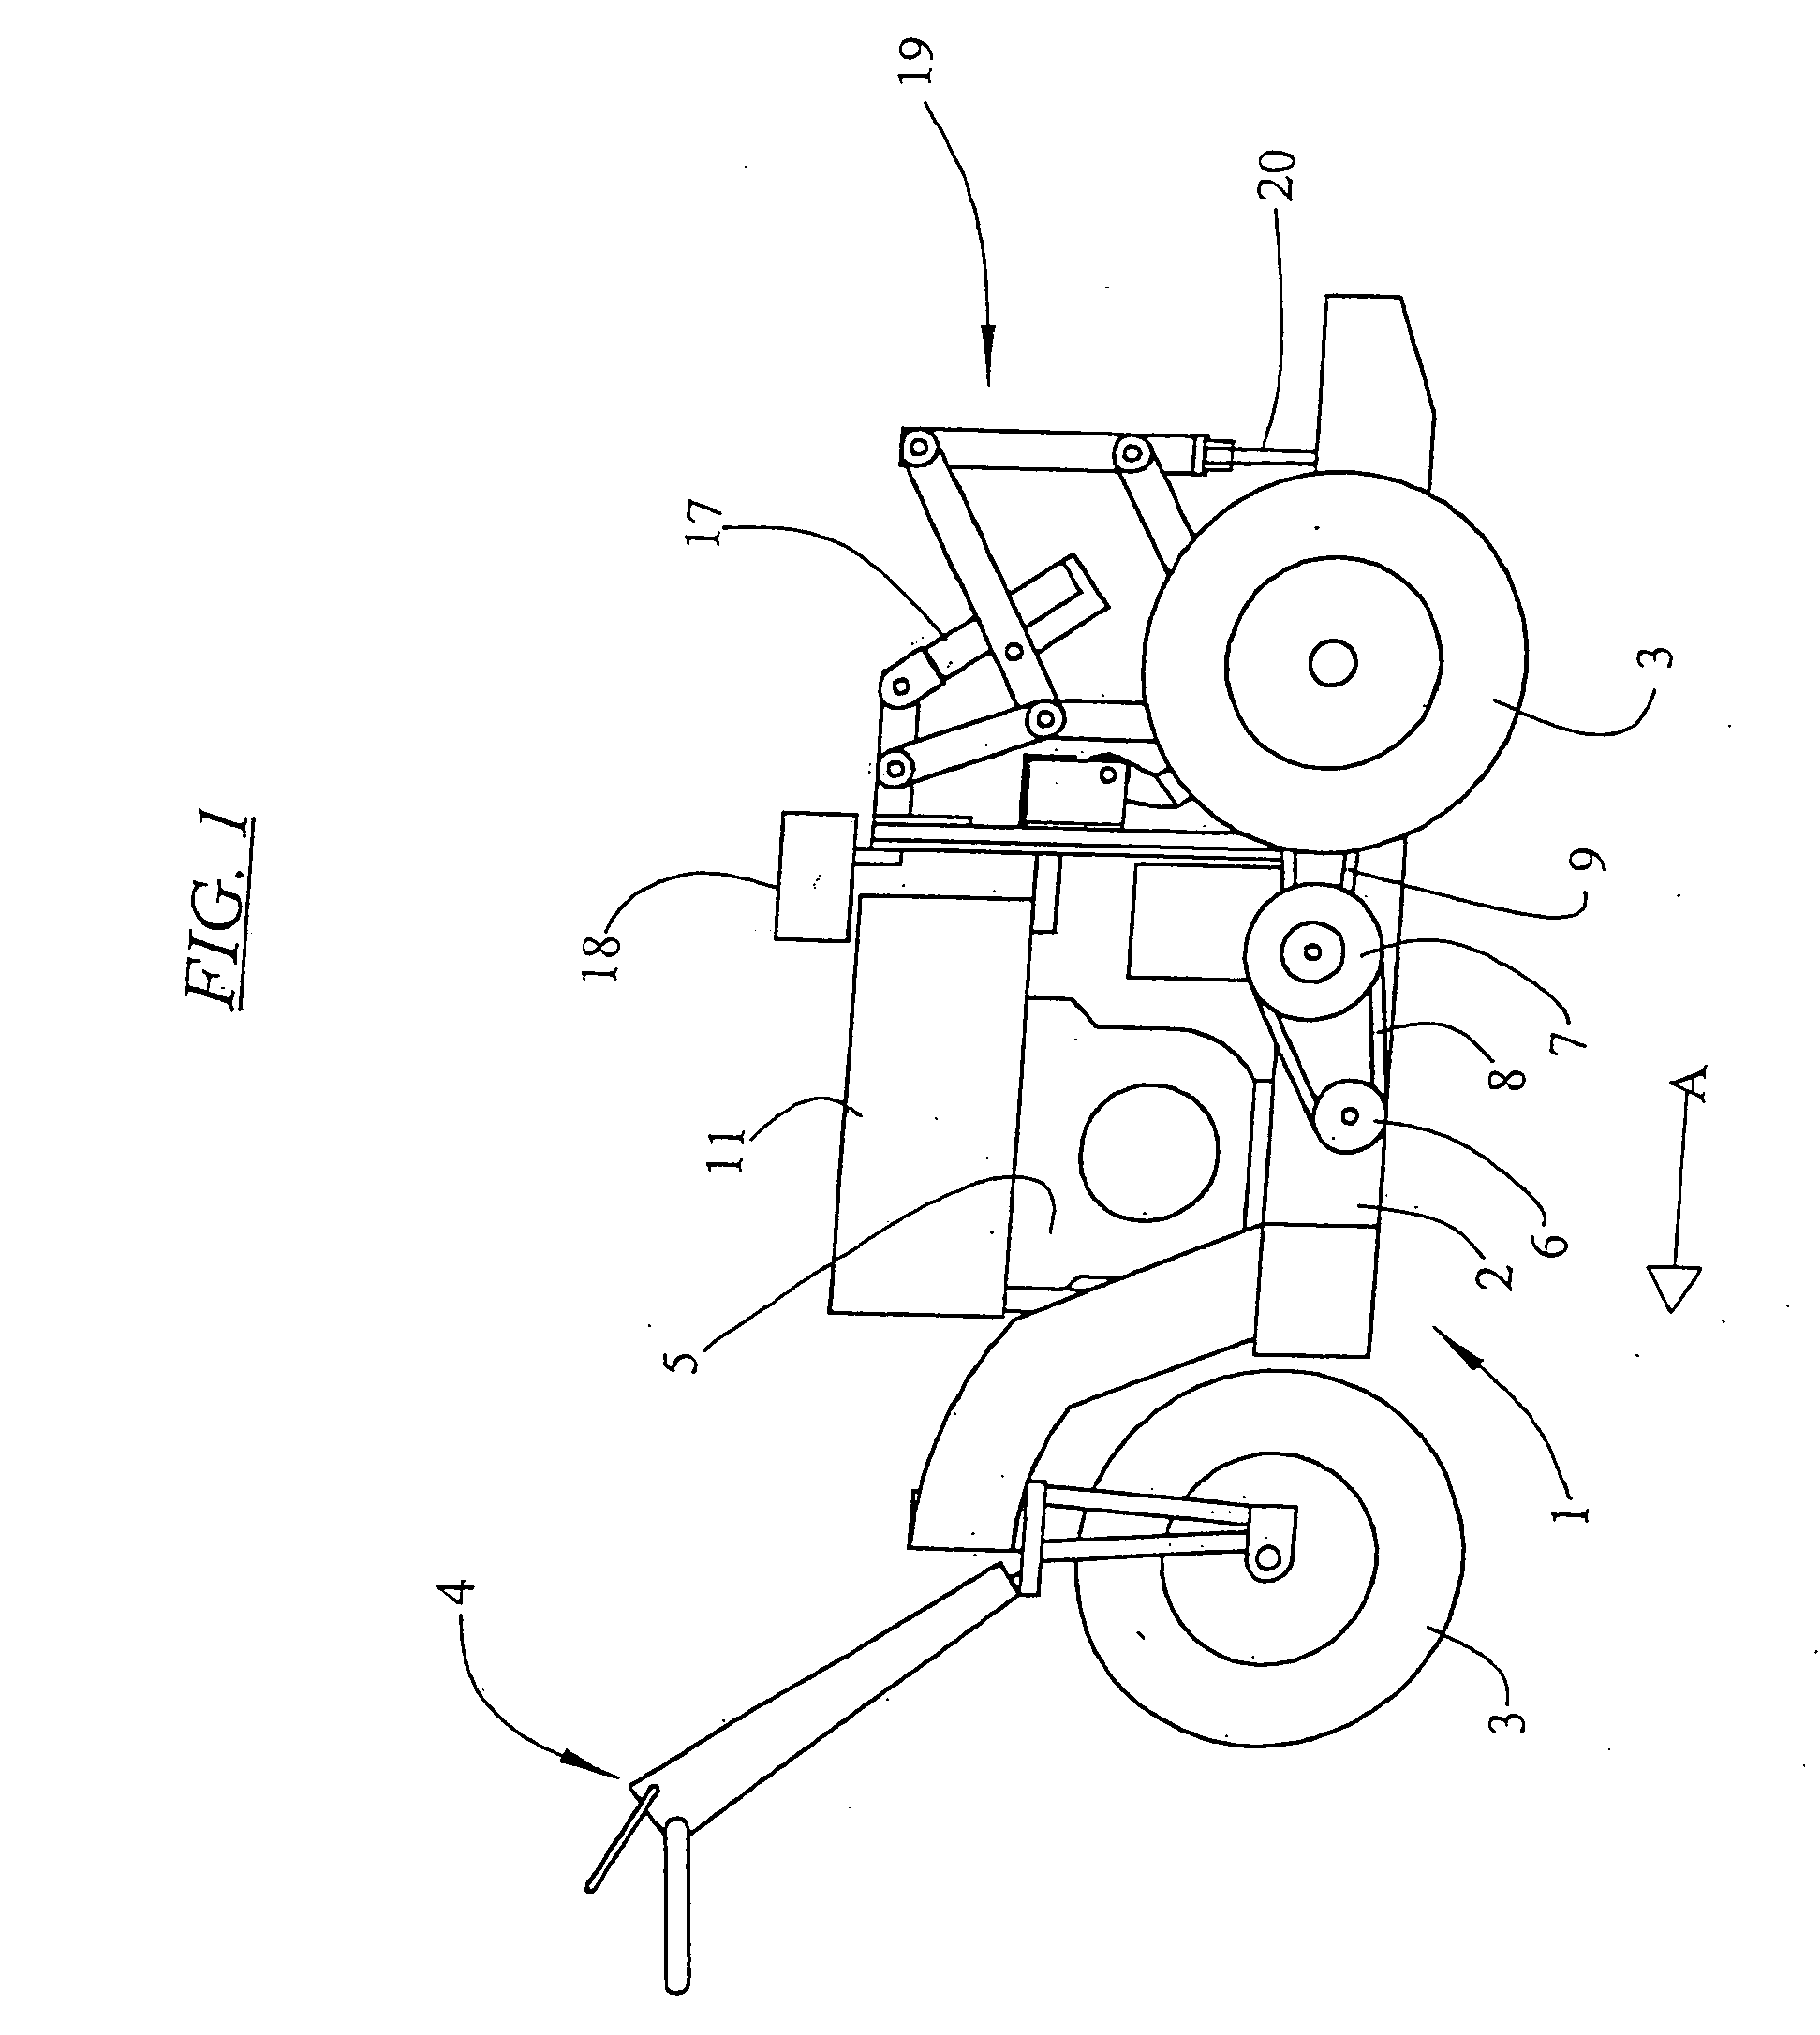 Cultivating device